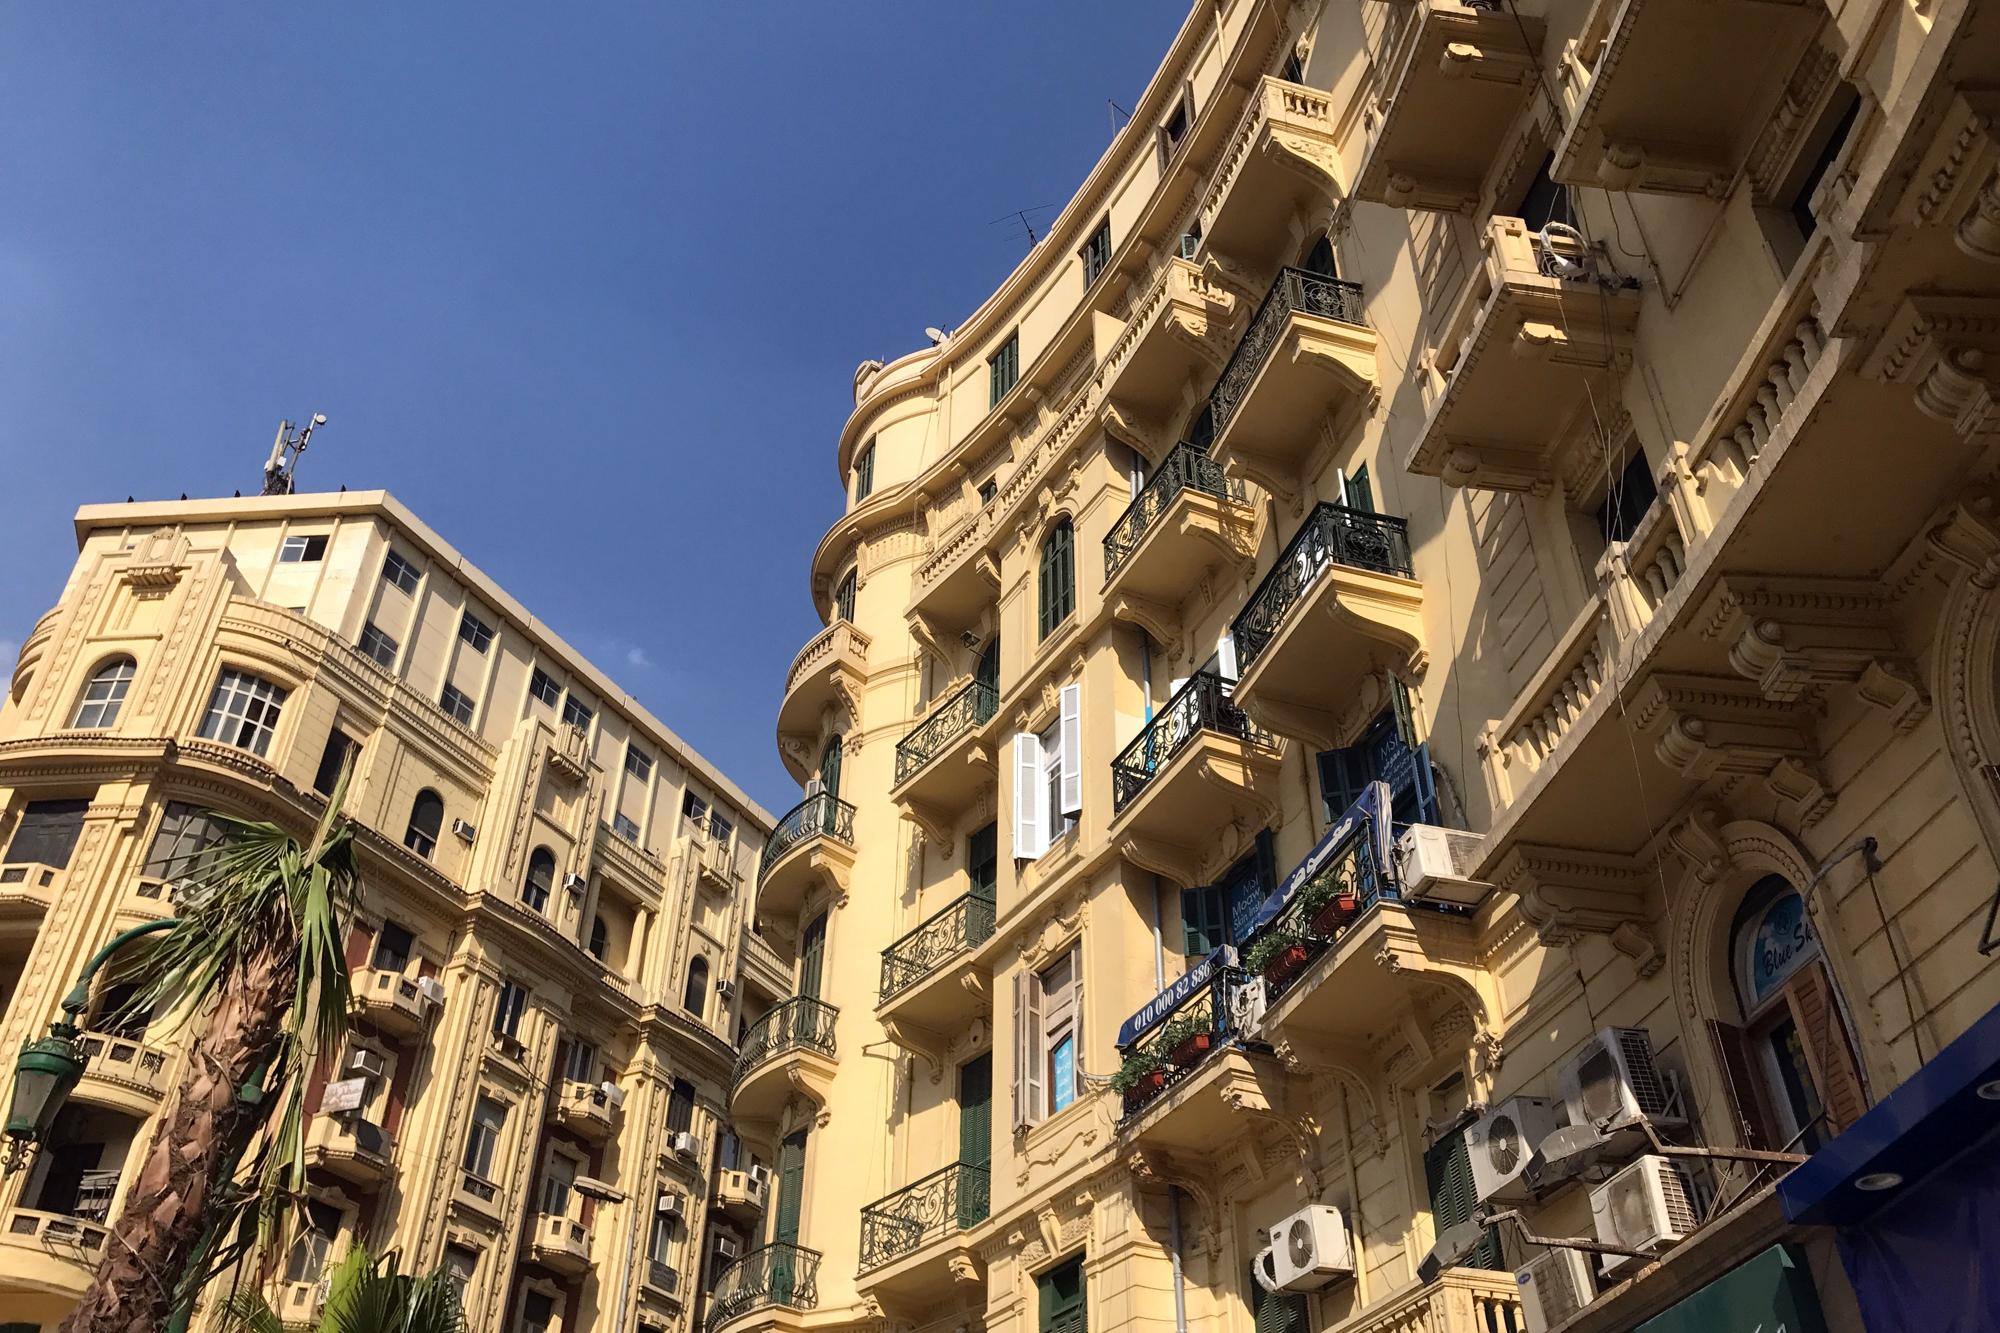 The tour takes place in downtown Cairo, much of which has been revitalised